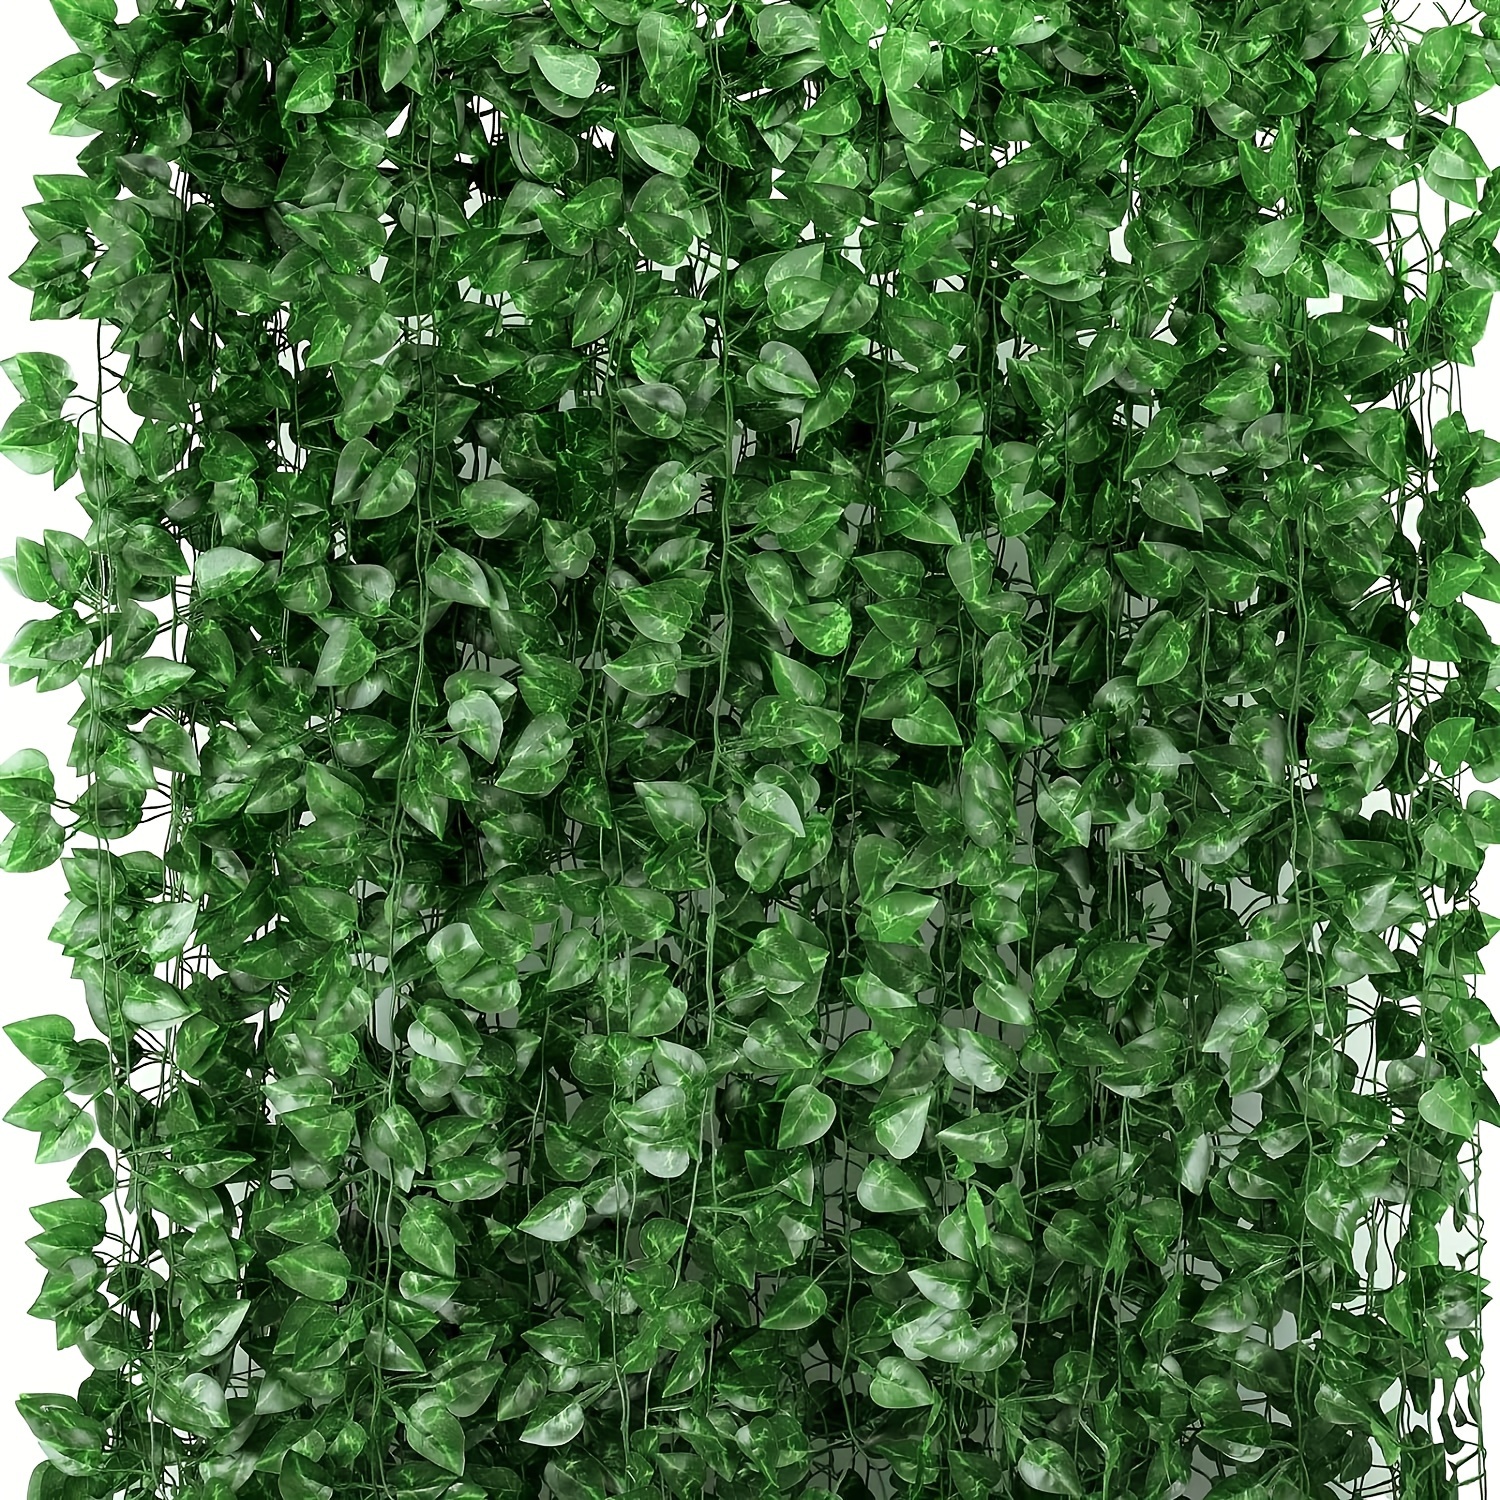 

12 Pack, Artificial Ivy Greenery Garland, Fake Vines Hanging Plants Backdrop For Room Bedroom Wall Decor, Green Leaves For Jungle Theme Party Wedding Decoration